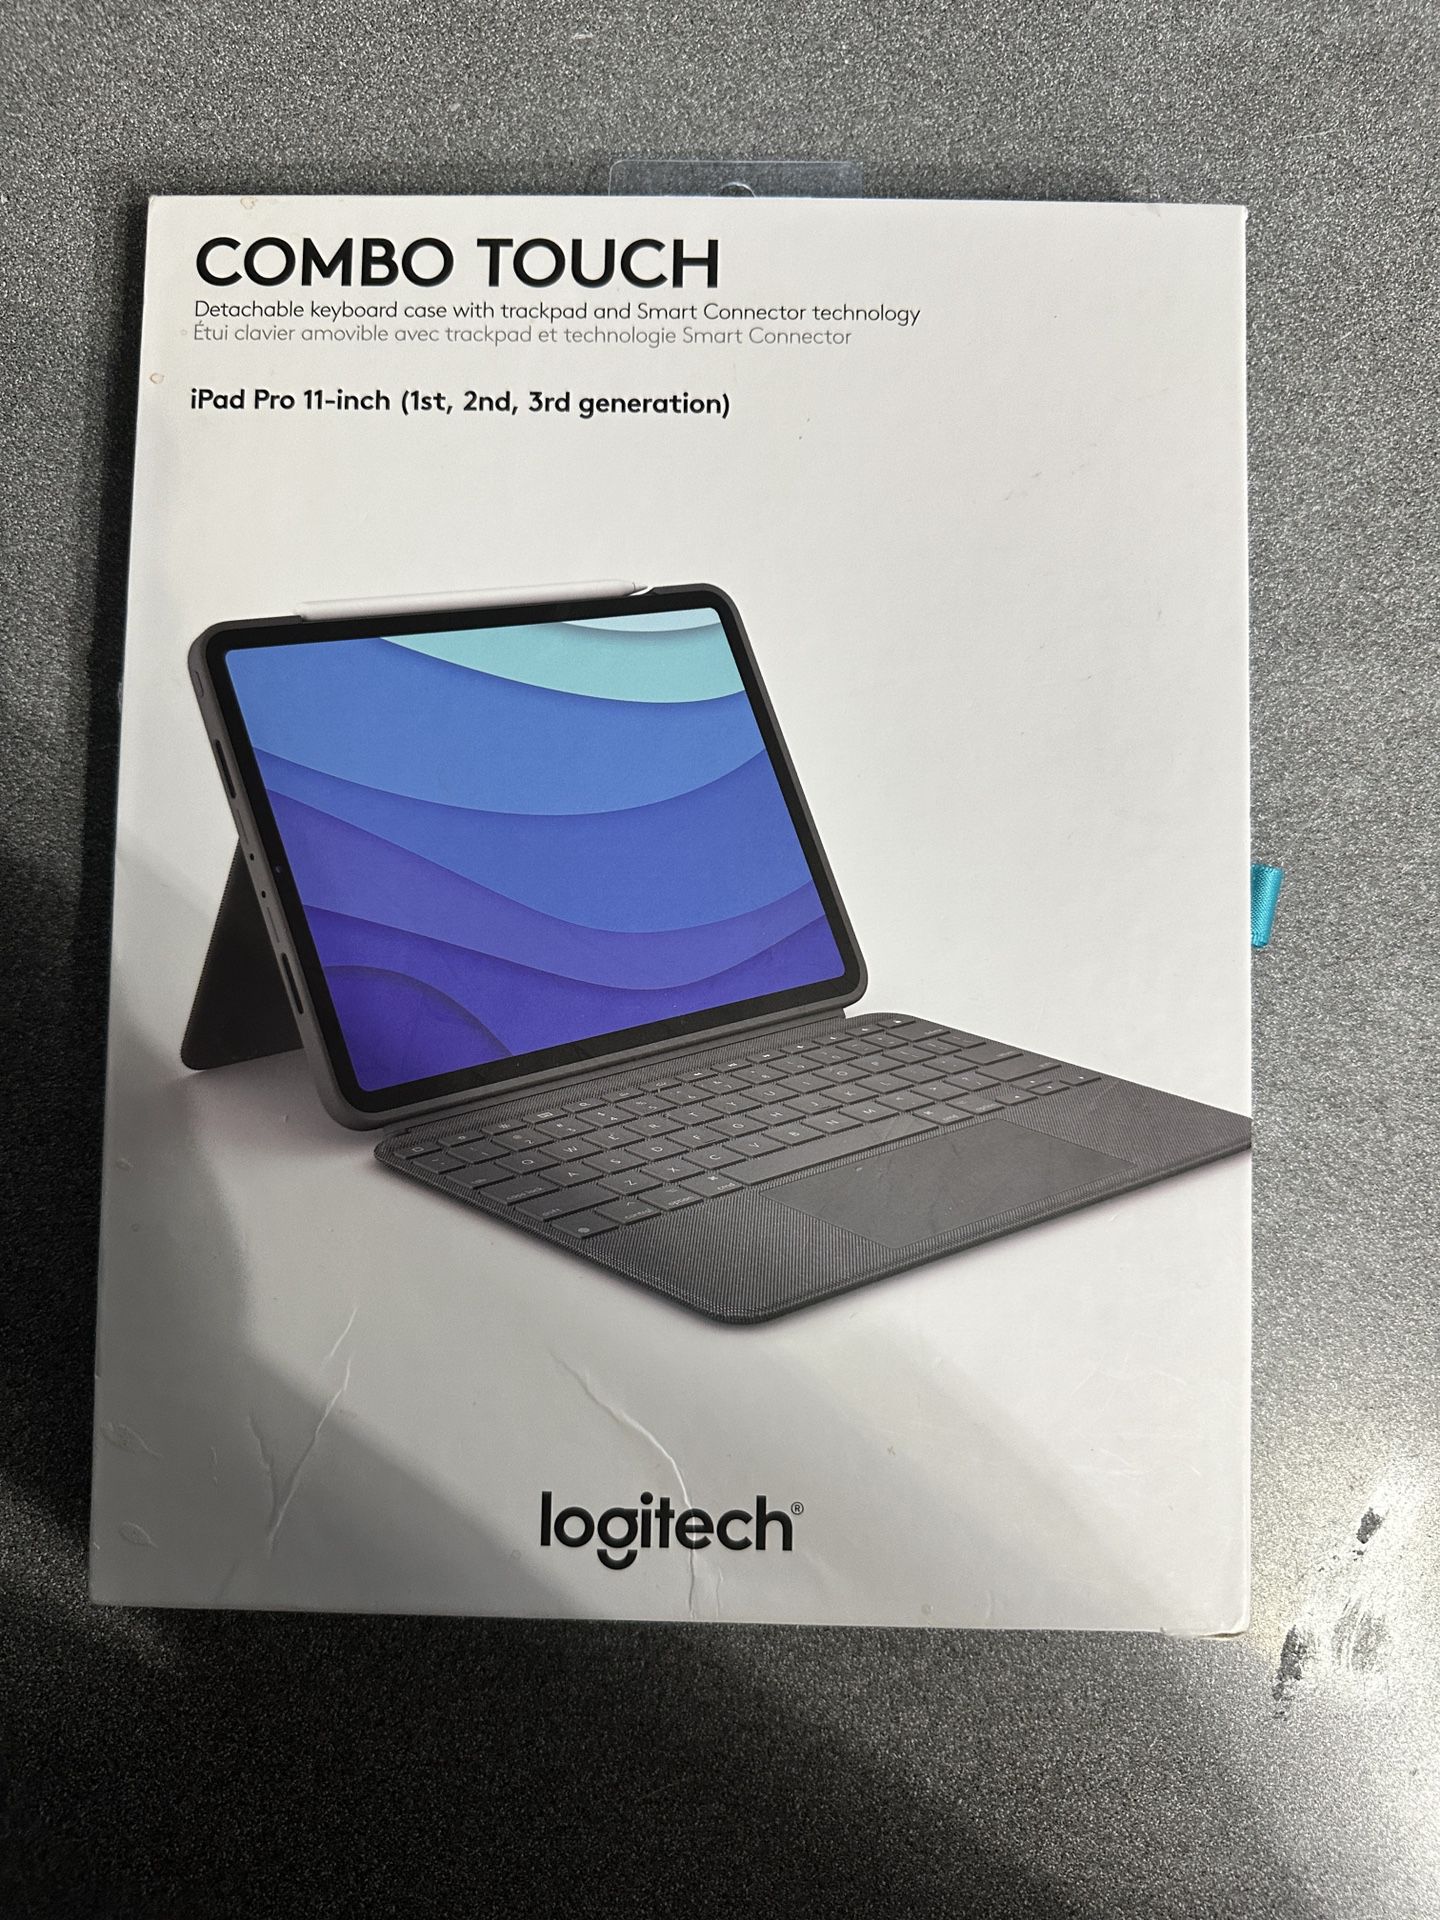 $75 - Combo Touch for iPad Pro 11" 1st-4th Gen MAKE AN OFFER!!